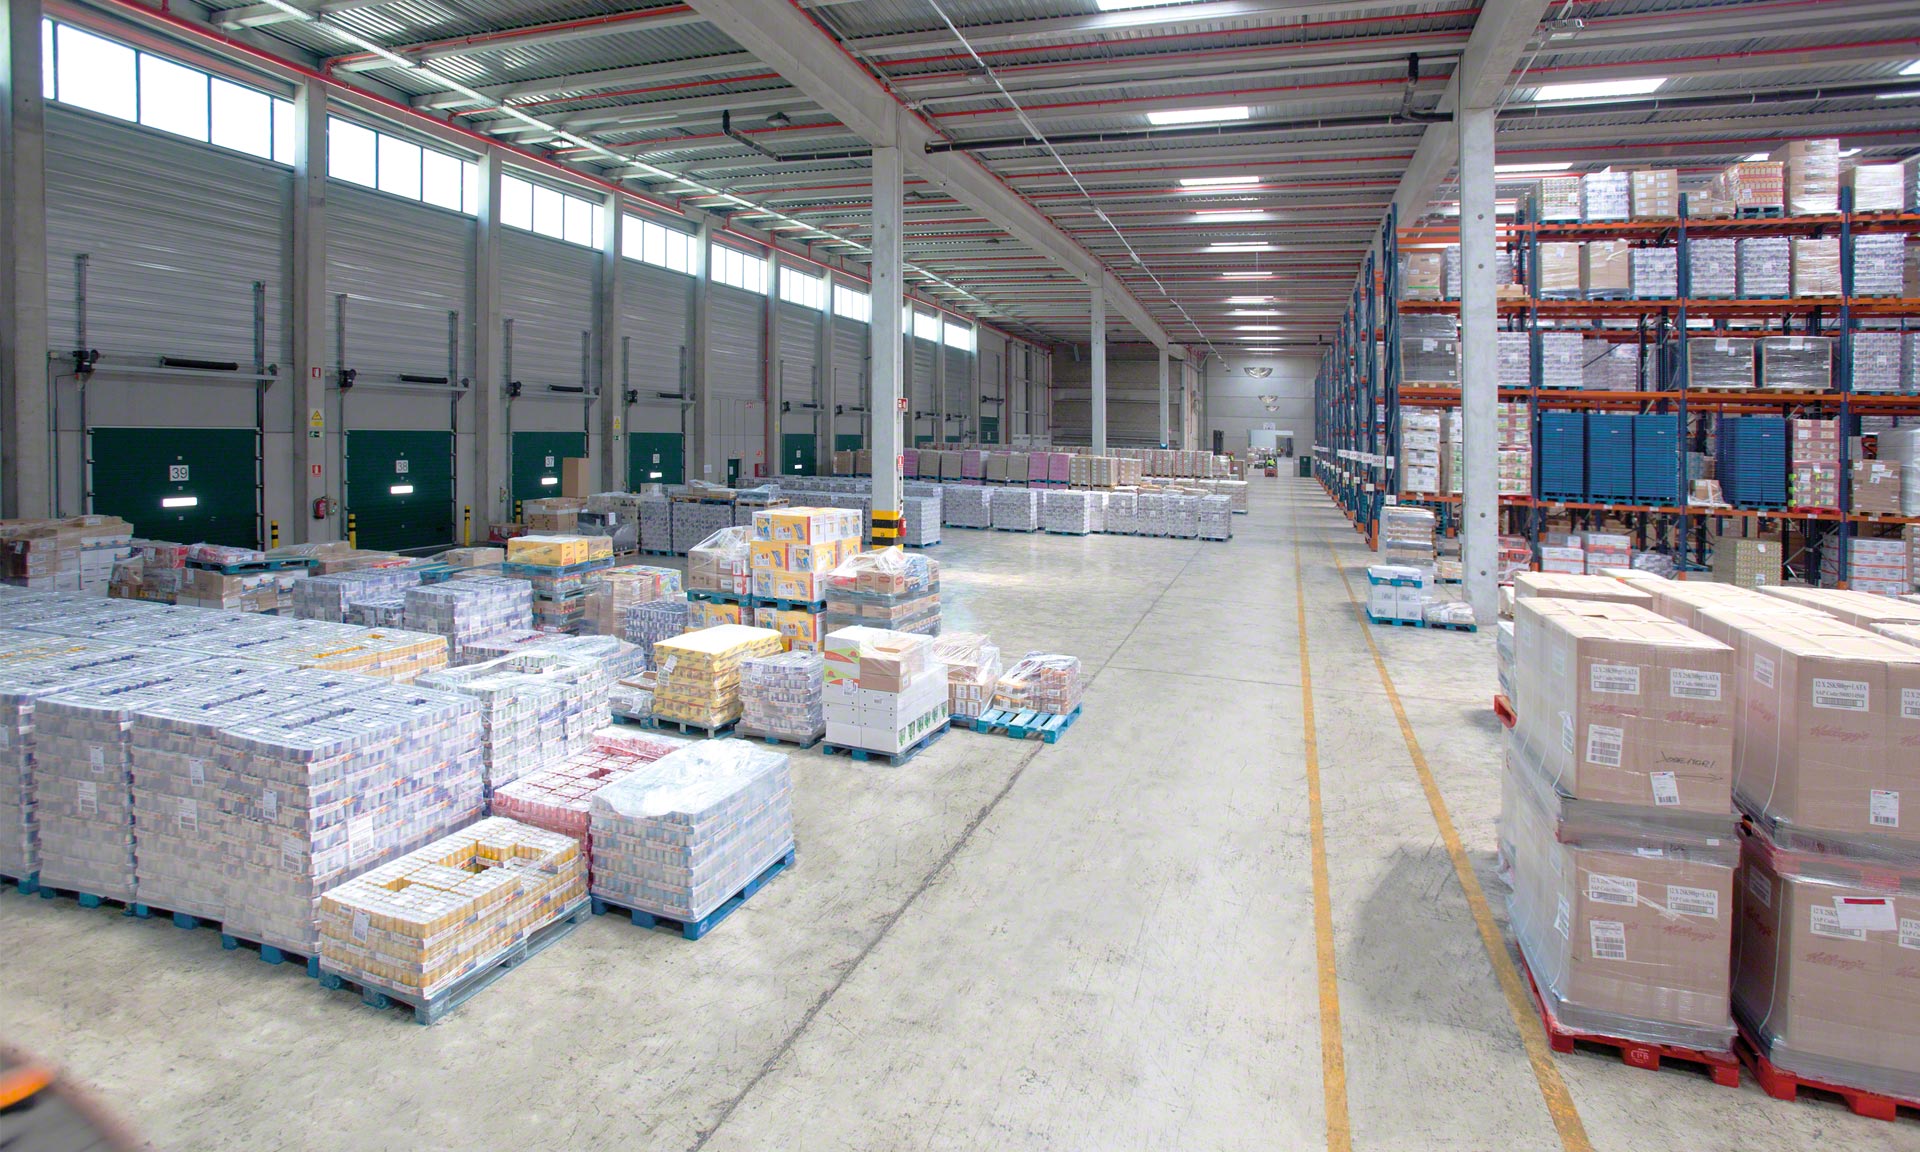 Procurement is a key operation in the warehouse